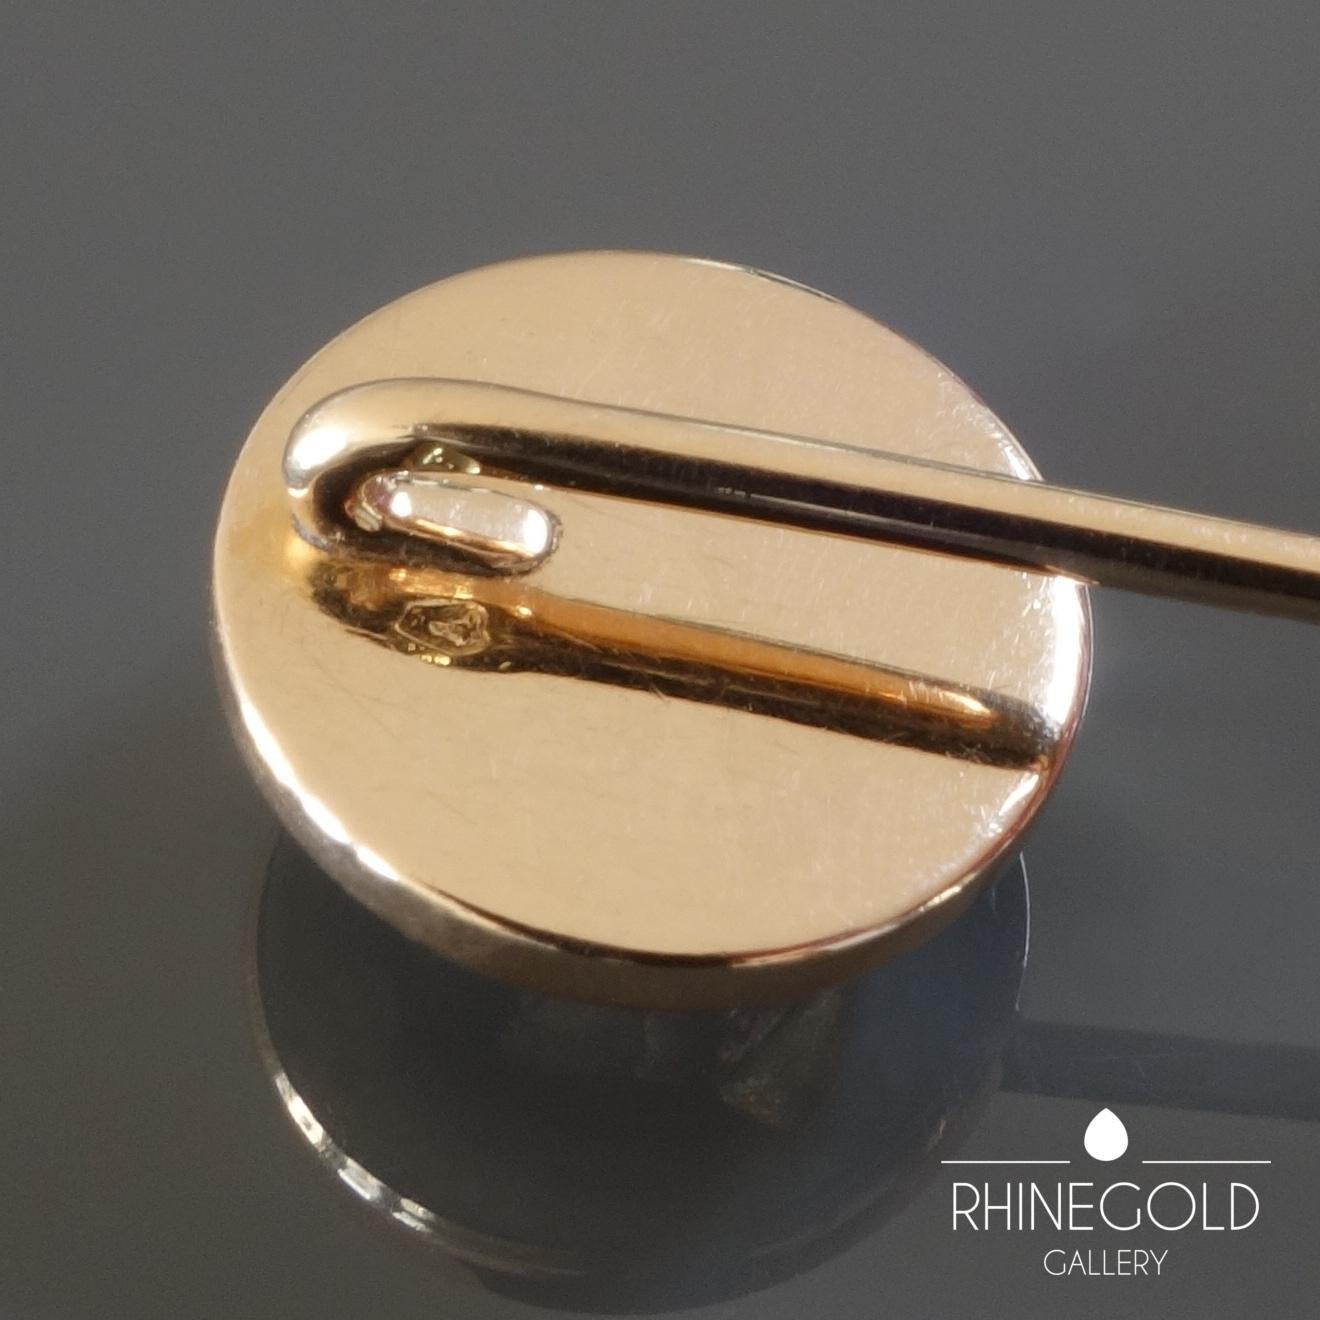 Antique Victorian Essex Crystal Reverse Intaglio Pug Dog Gold Stick Pin
14k rose gold (580/1000), rock crystal
Length 7.8 cm, diameter of head 1.4 cm
Marks: Viennese assay marks for gold (fox head; ‘A’ in an octagon), illegible maker’s mark (‘FD’